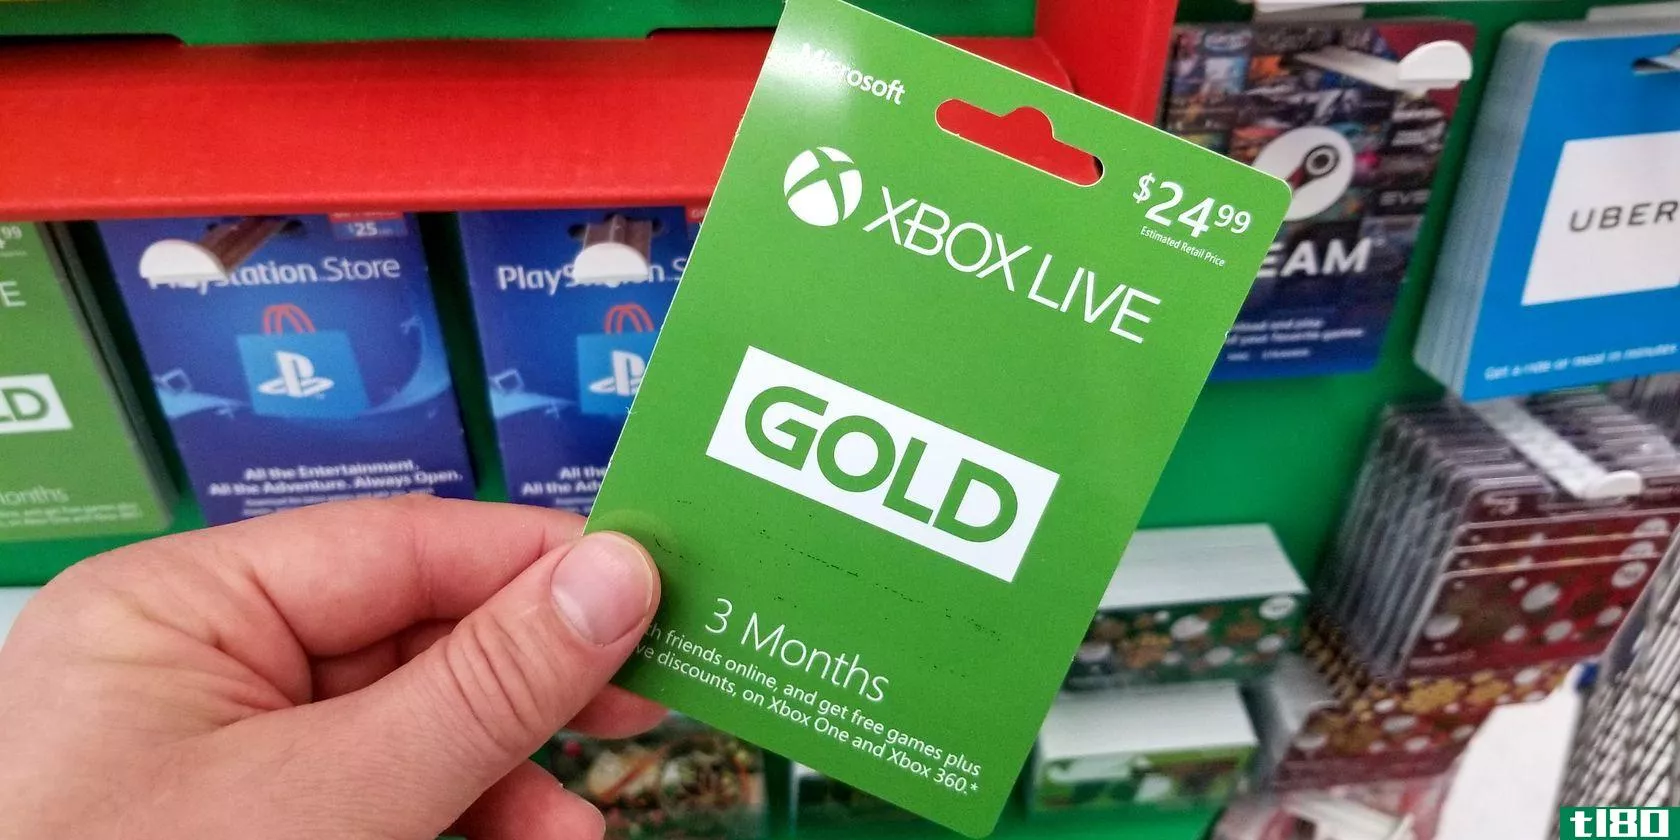 Someone holding an Xbox Live Gold card